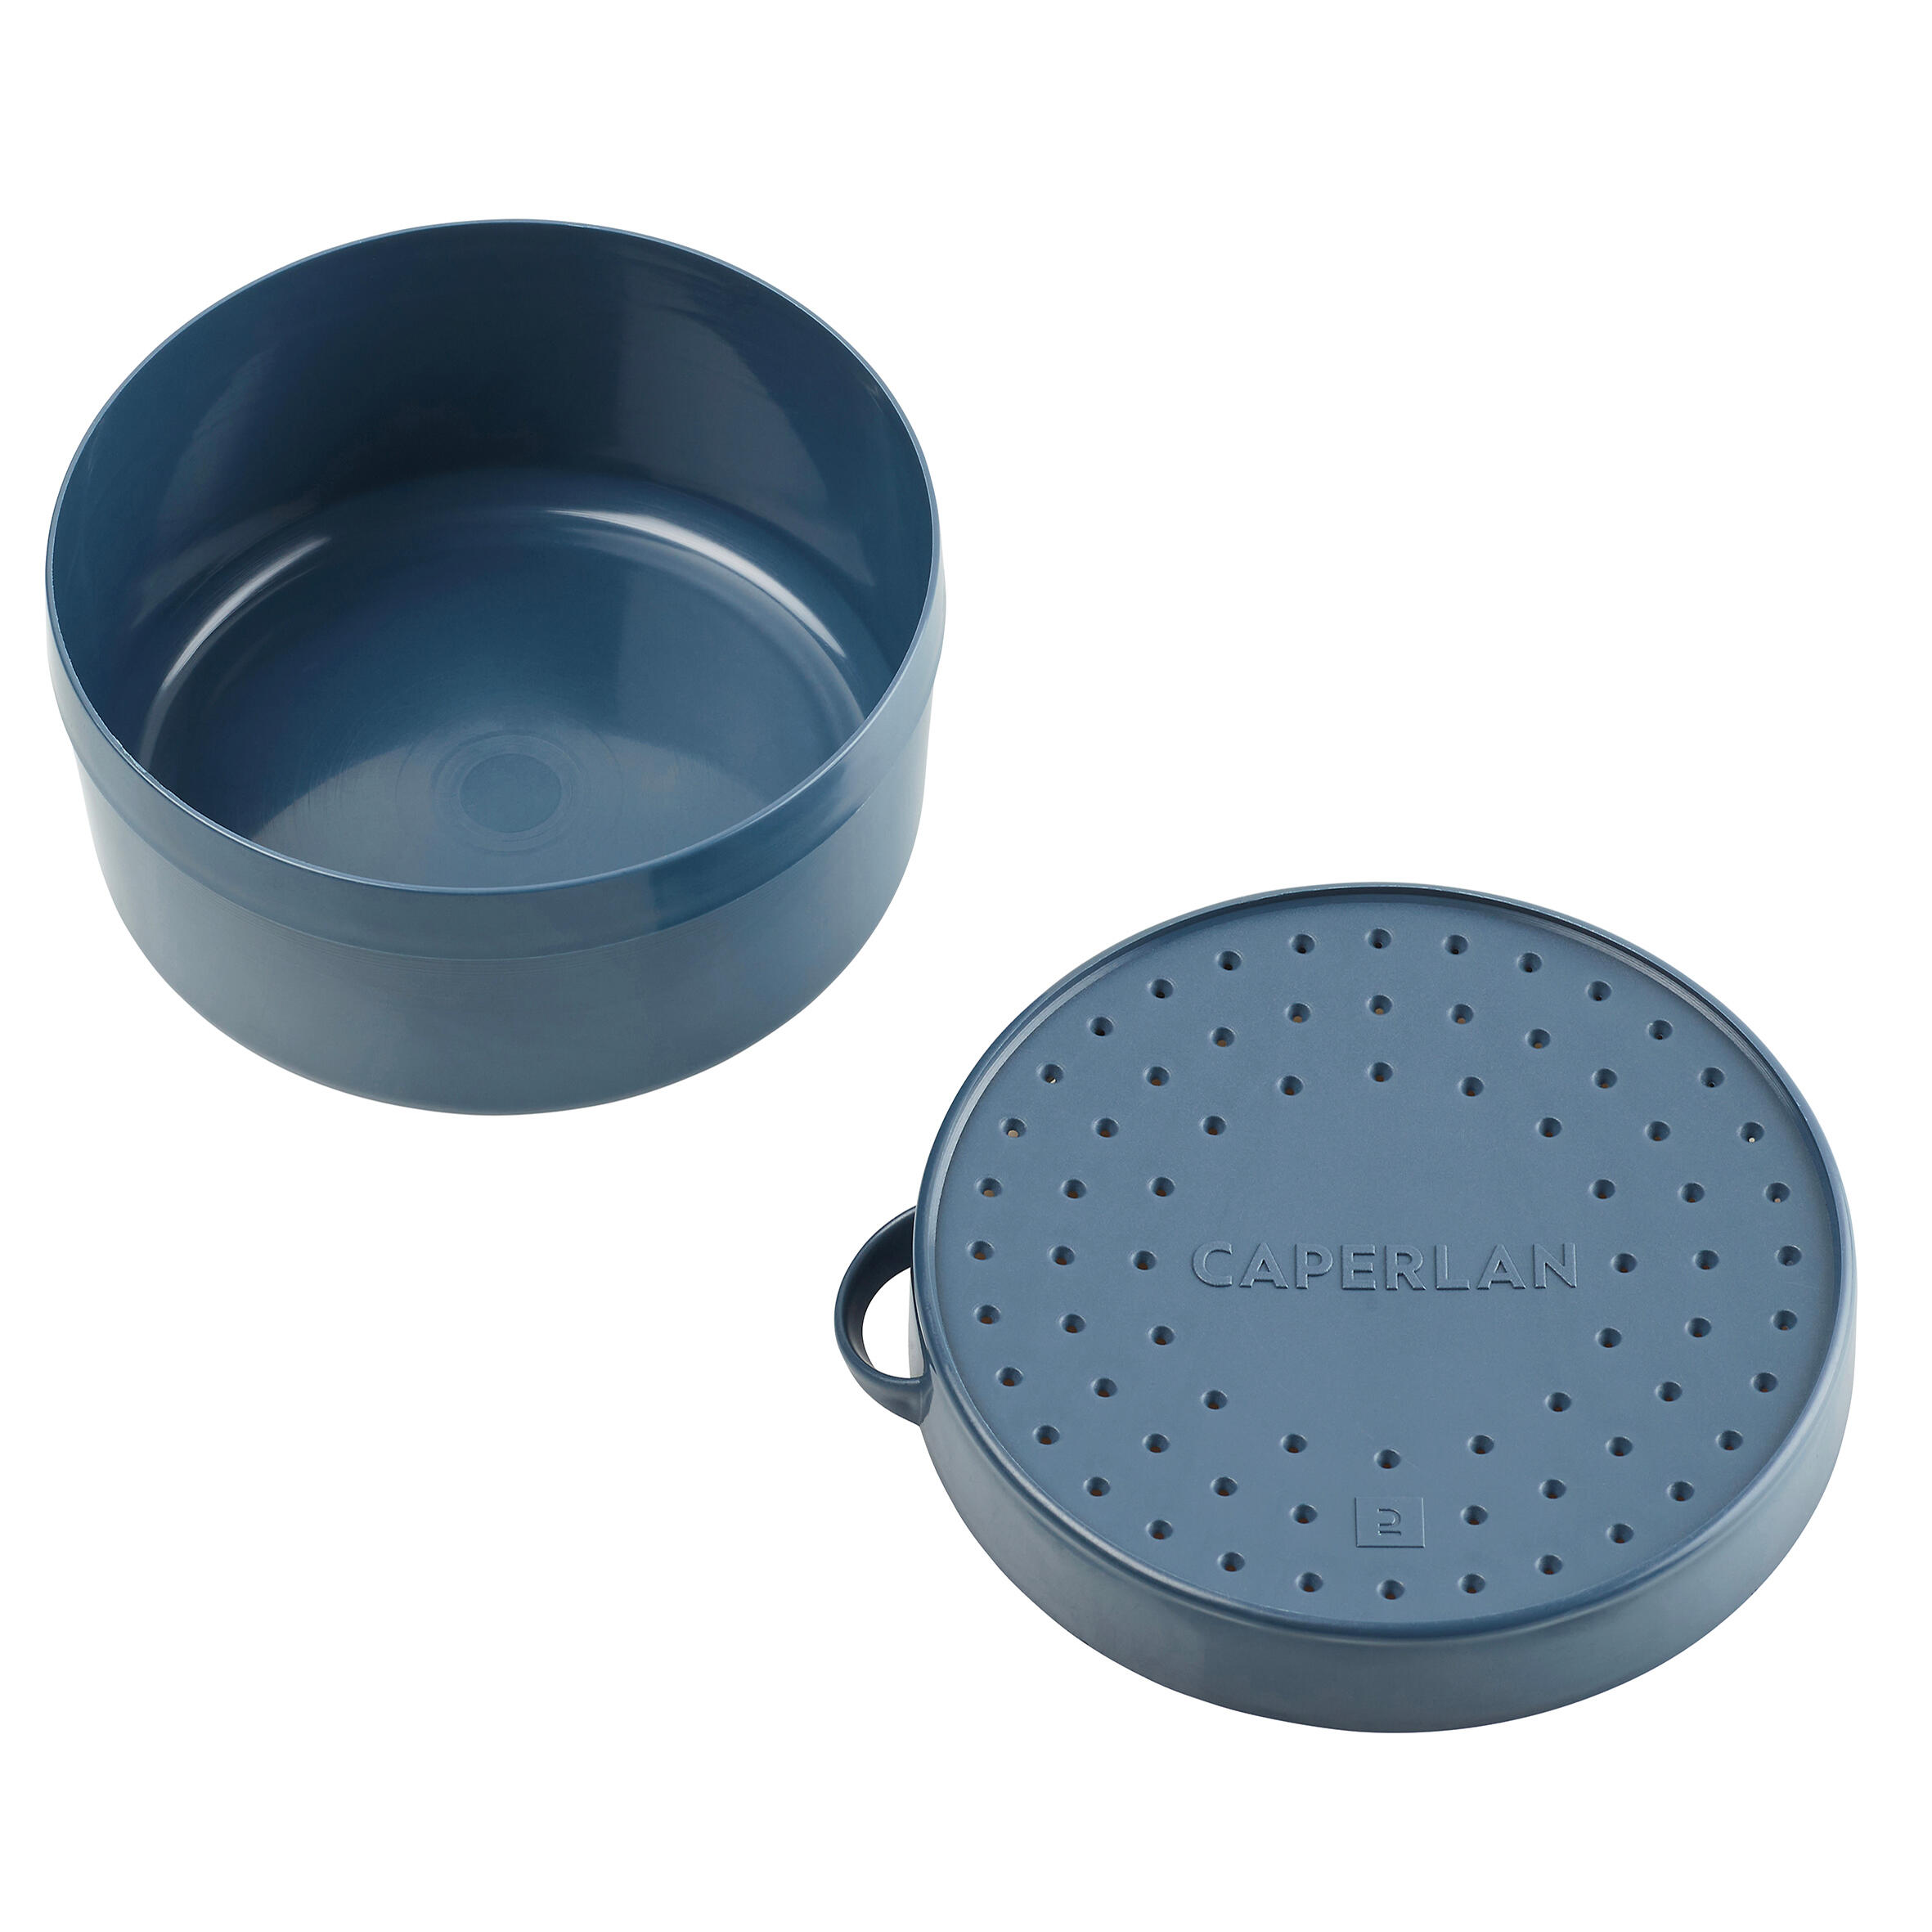 ROUND BAIT BOX 80MM DIAMETER WITH A LID WITH HOLES LVB 0.2L 2/4